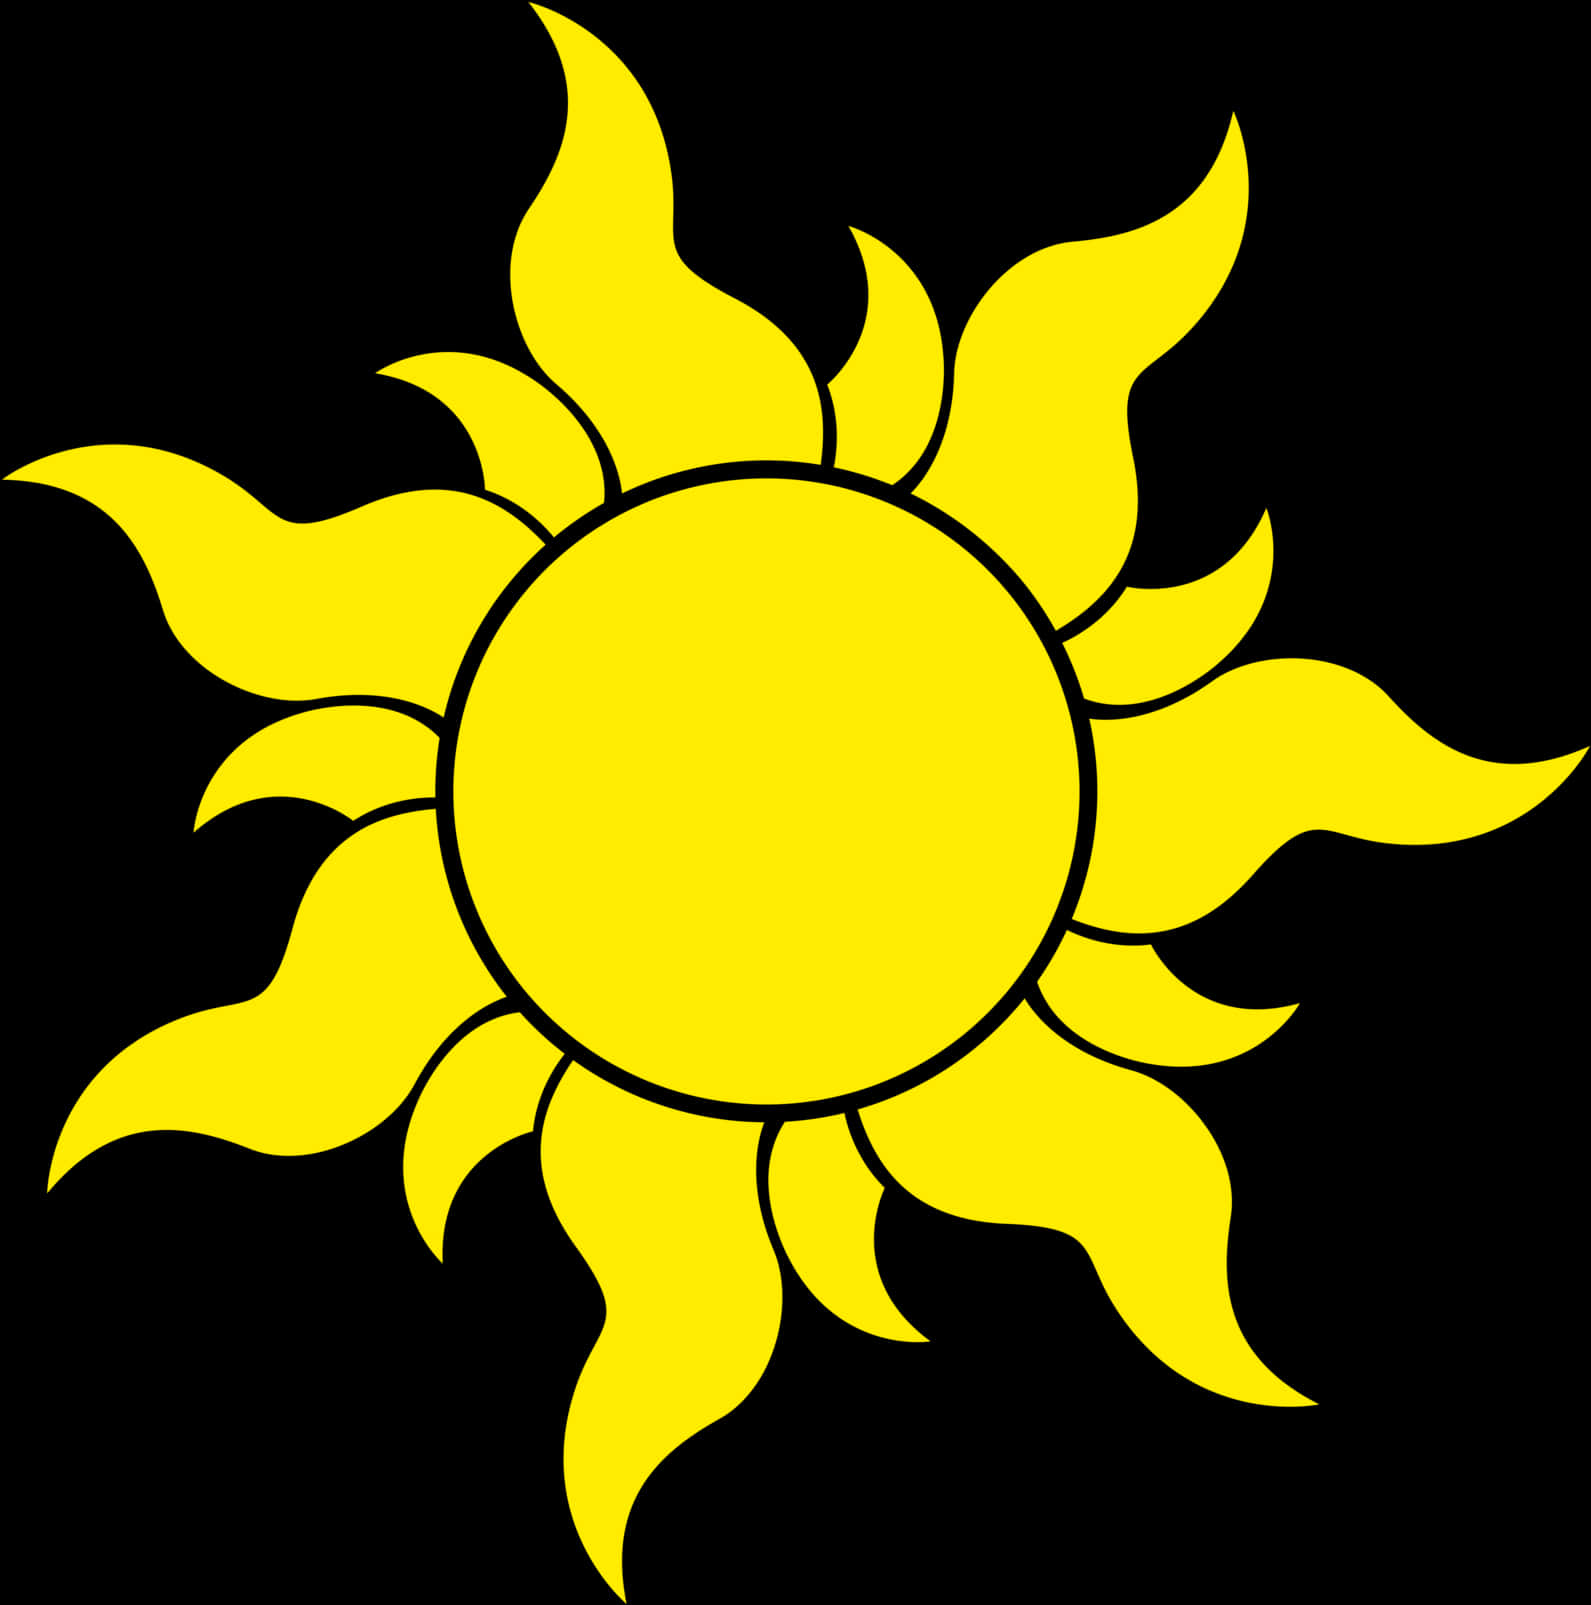 Yellow Sun Graphic Transparent Background PNG